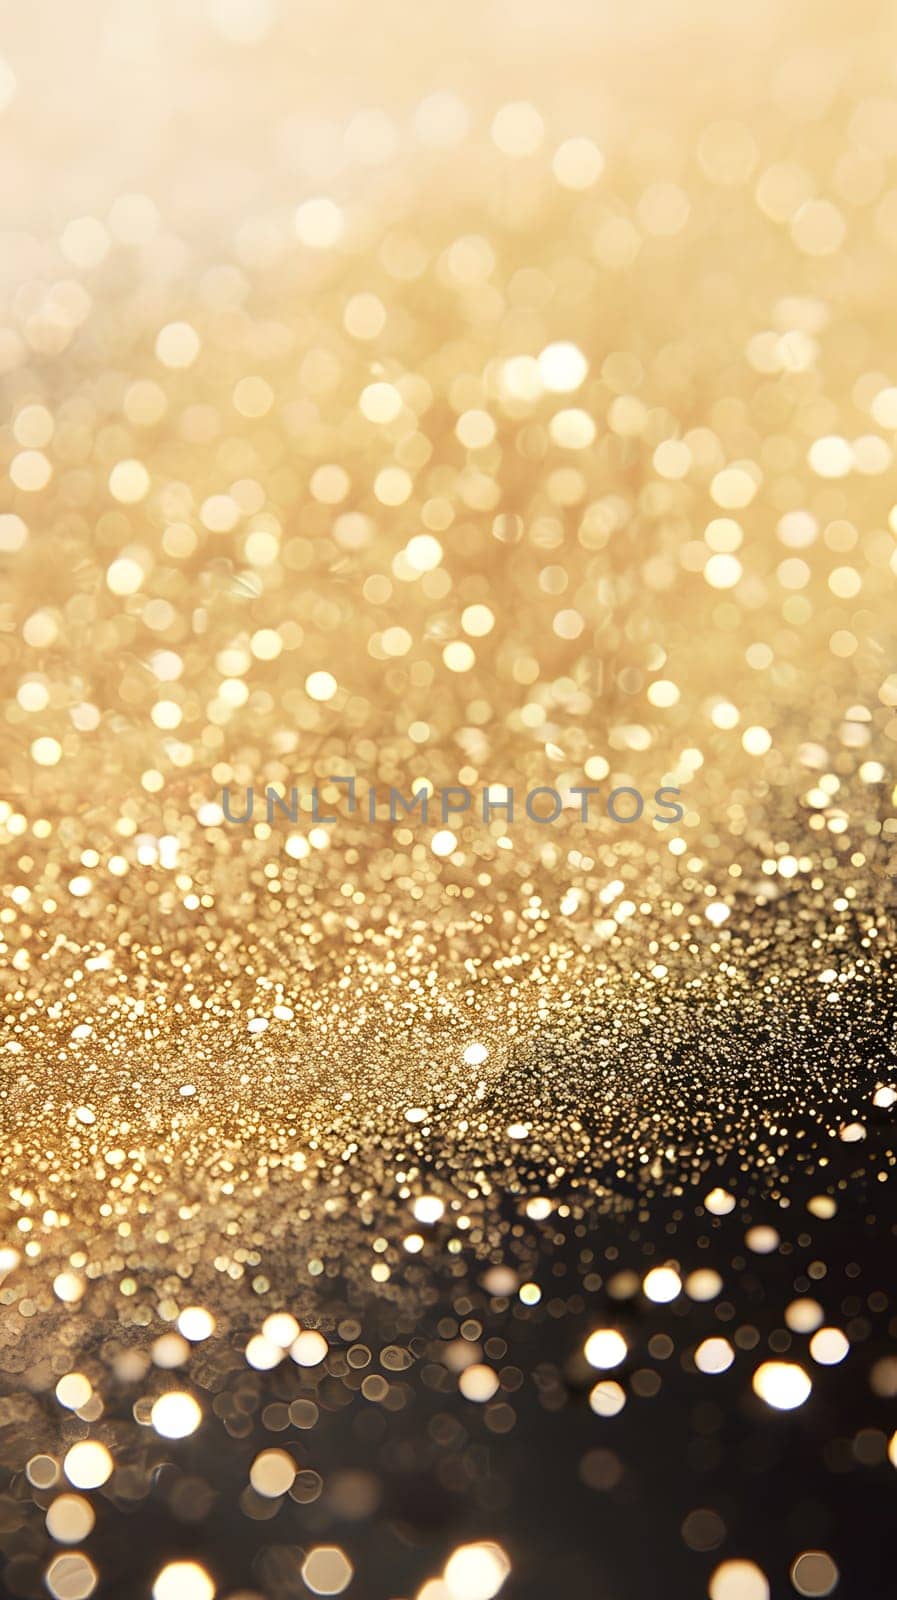 A detailed shot of a liquid gold and black glitter background, shimmering like a wet road surface with different tints and shades creating a mesmerizing pattern